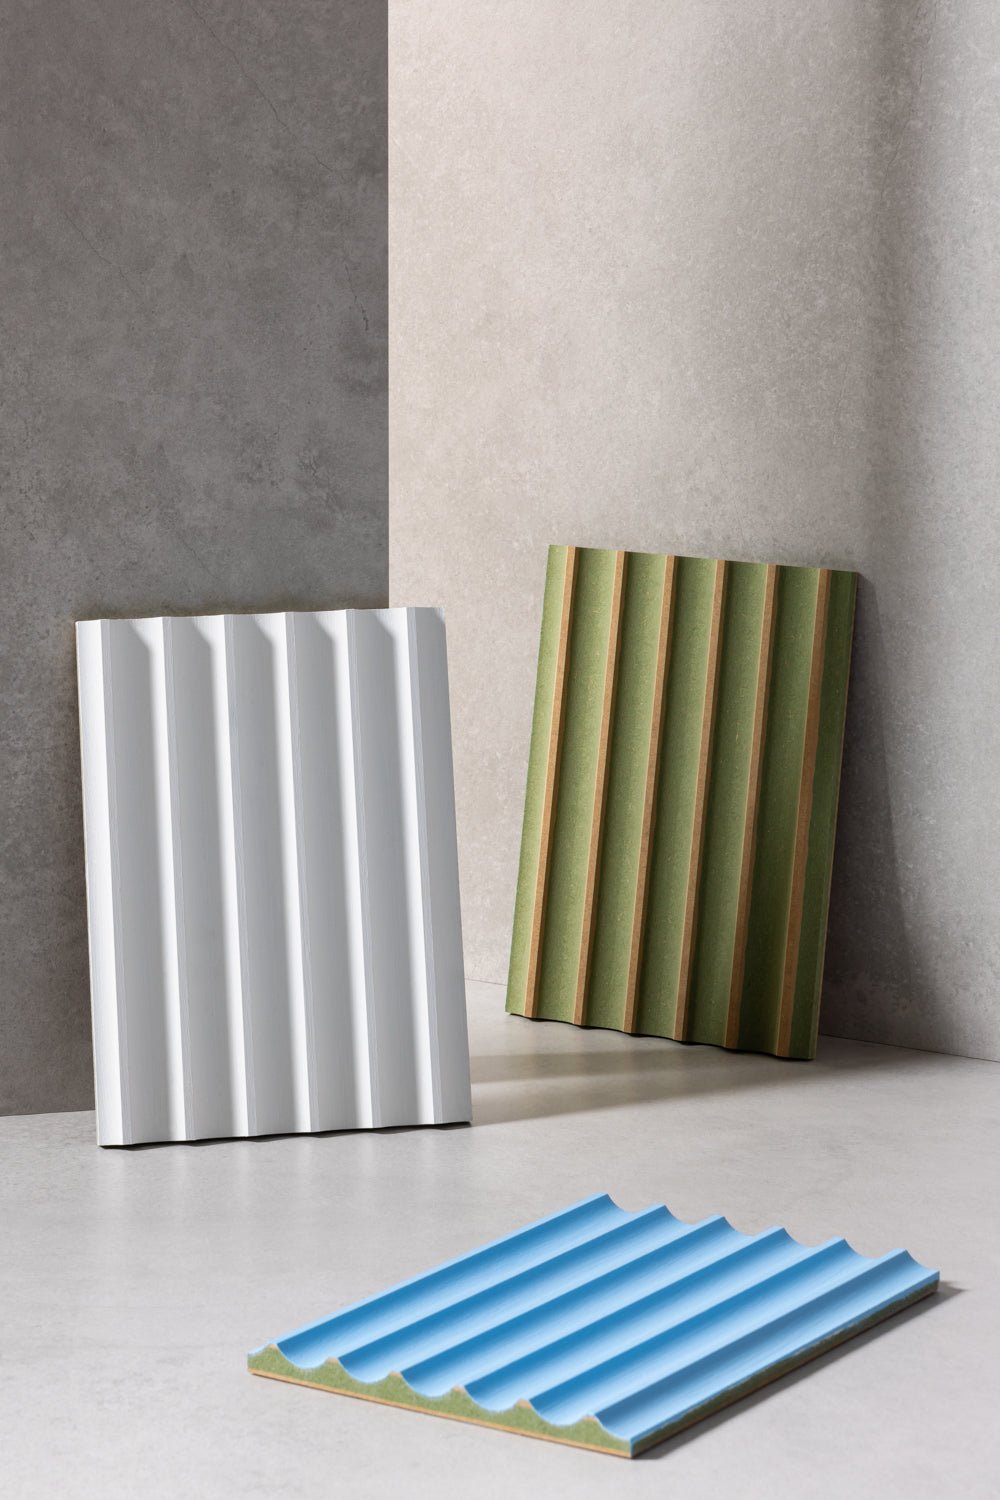 image to show fluted panel samples 

